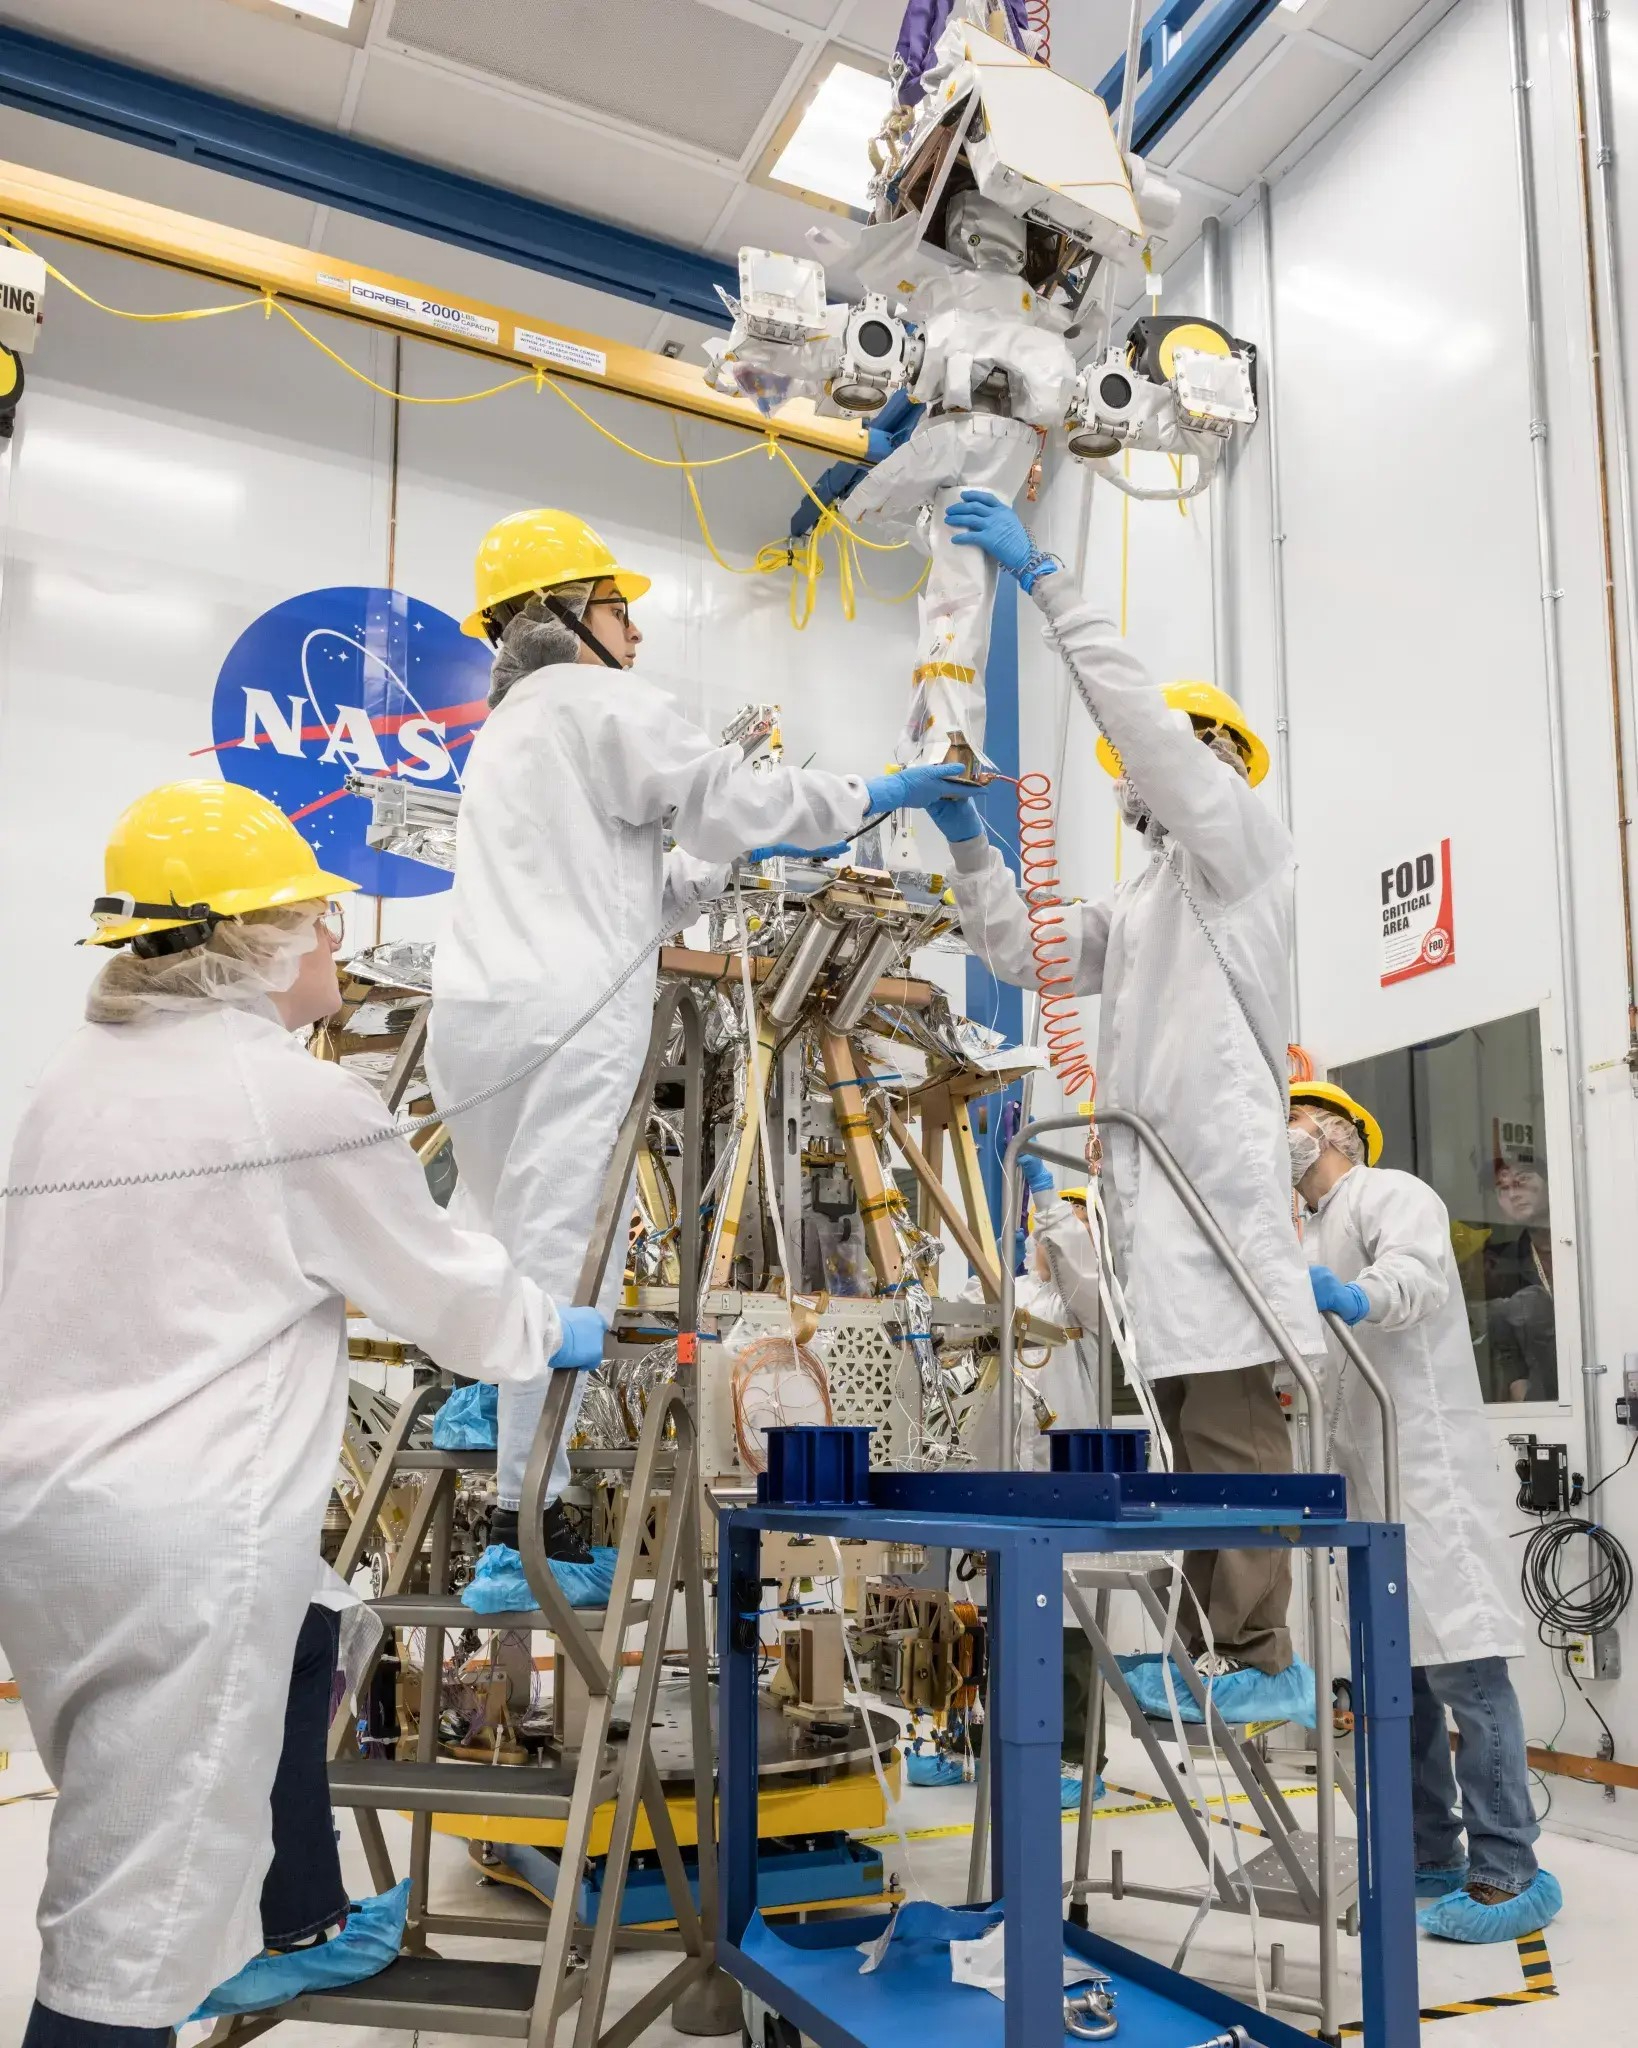 Four white-coated, yellow hard hat-wearing technicians assemble a robotic explorer in a white room.